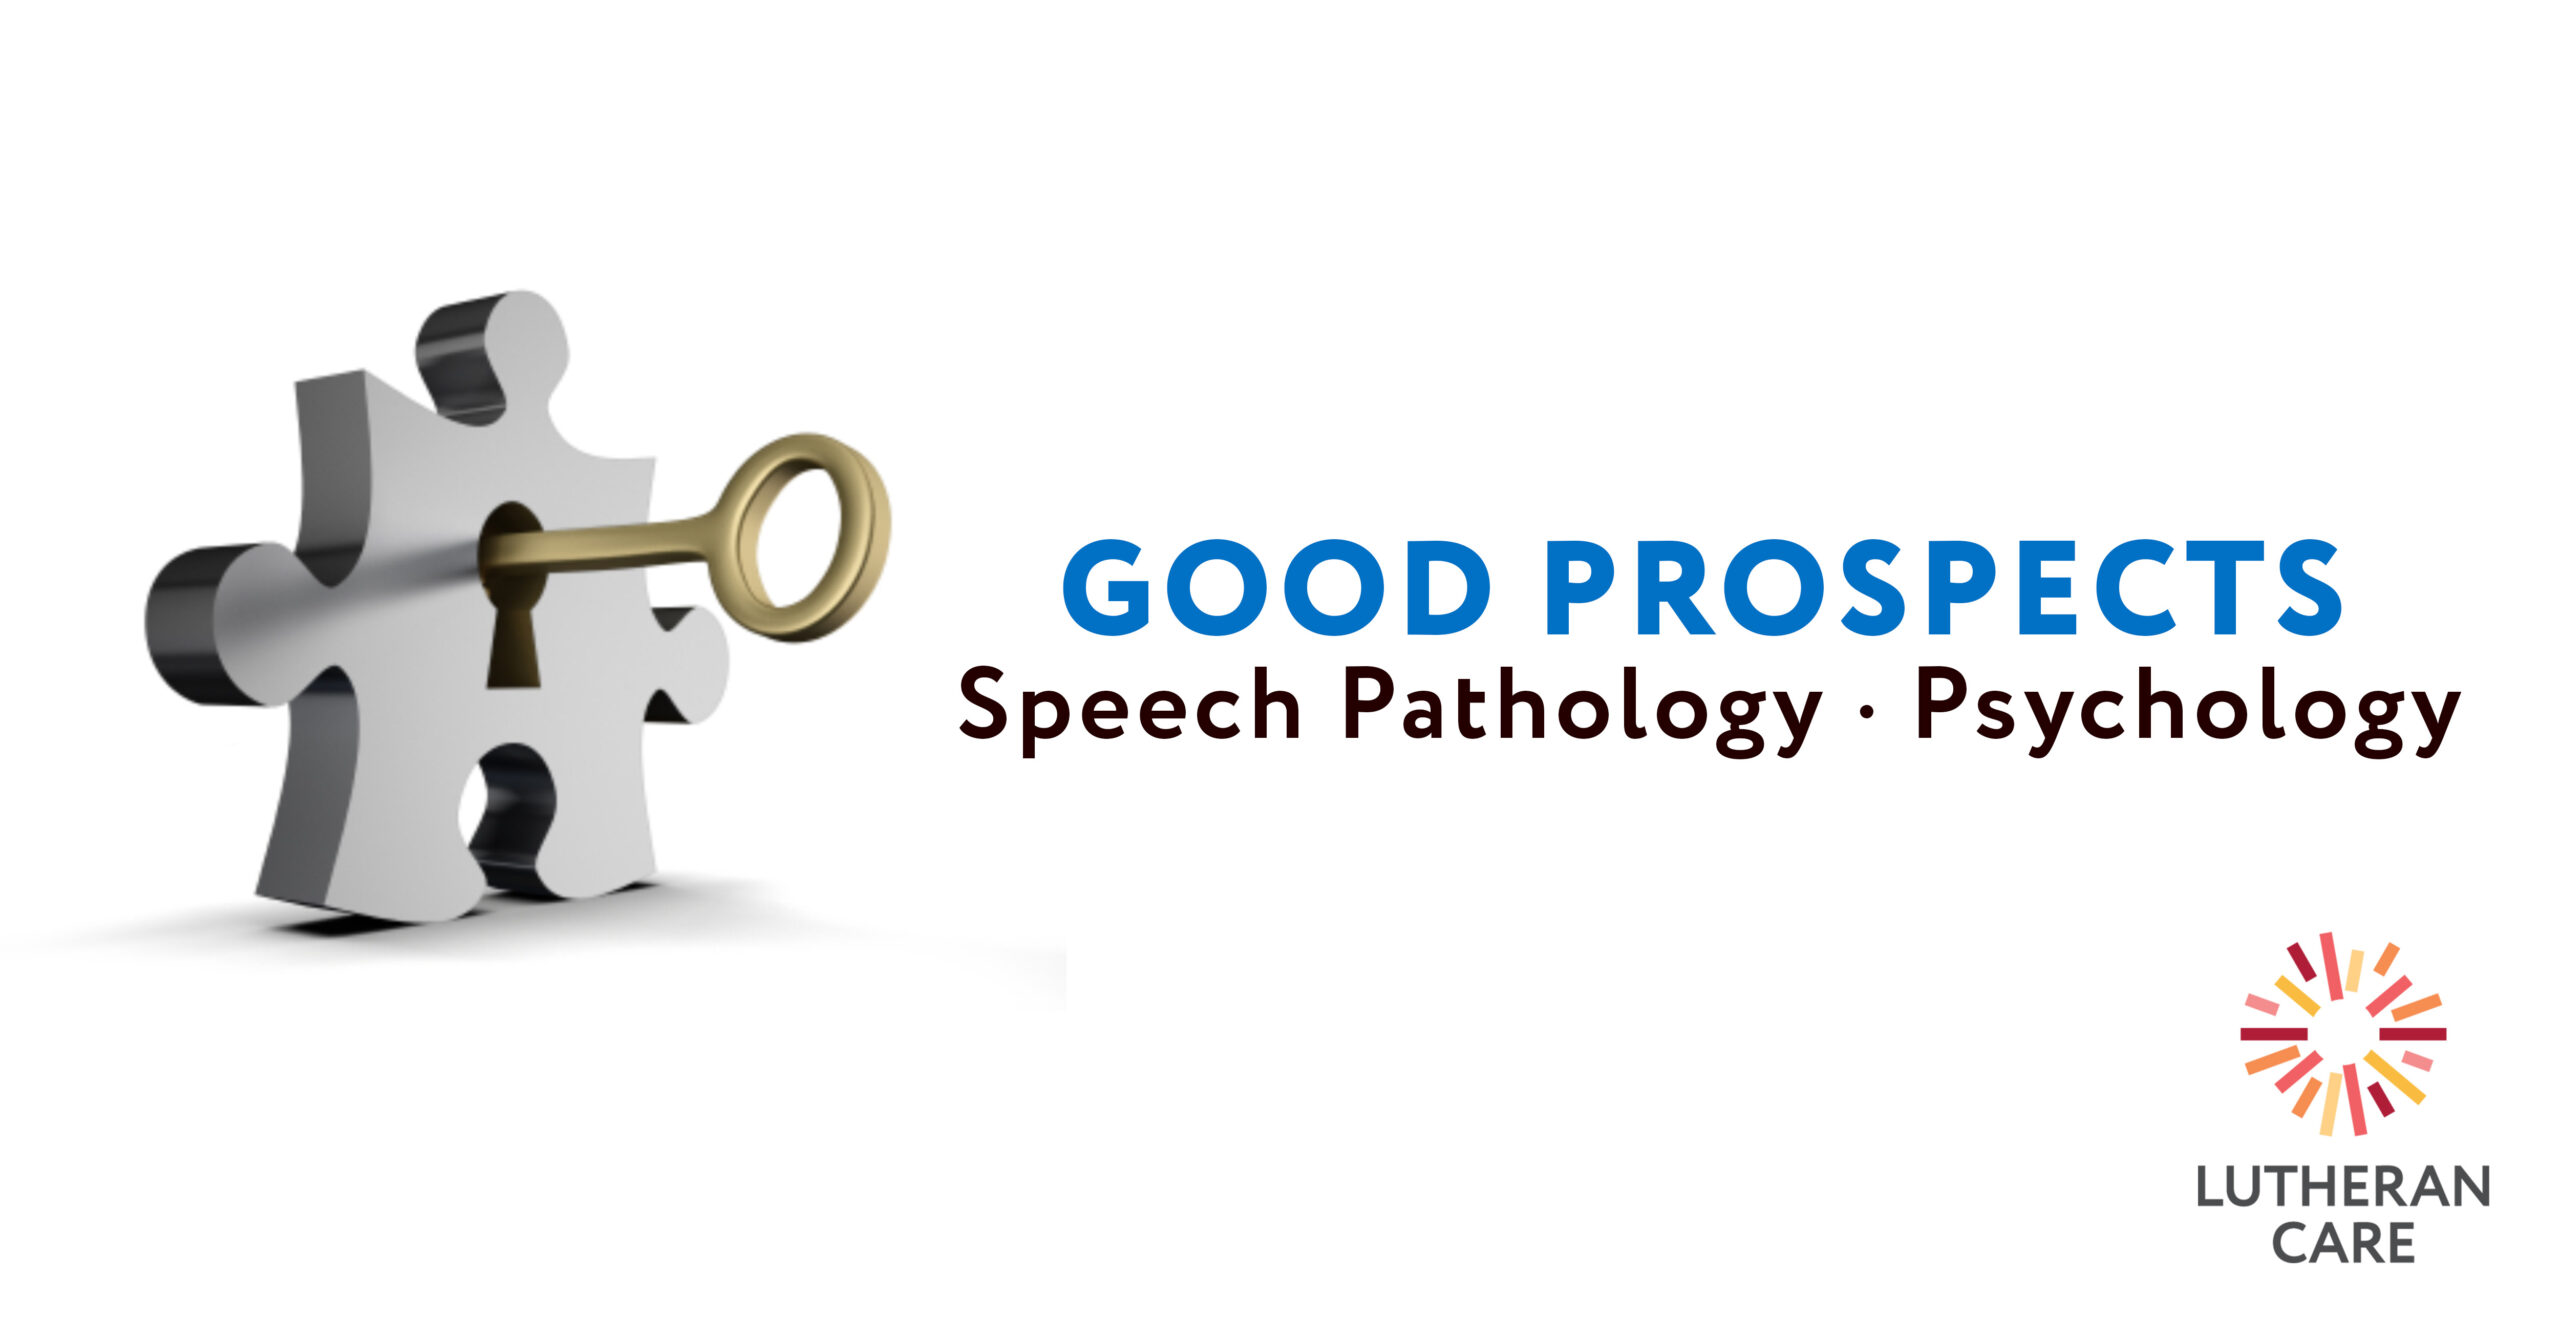 Good Prospects logo with the Lutheran Care logo